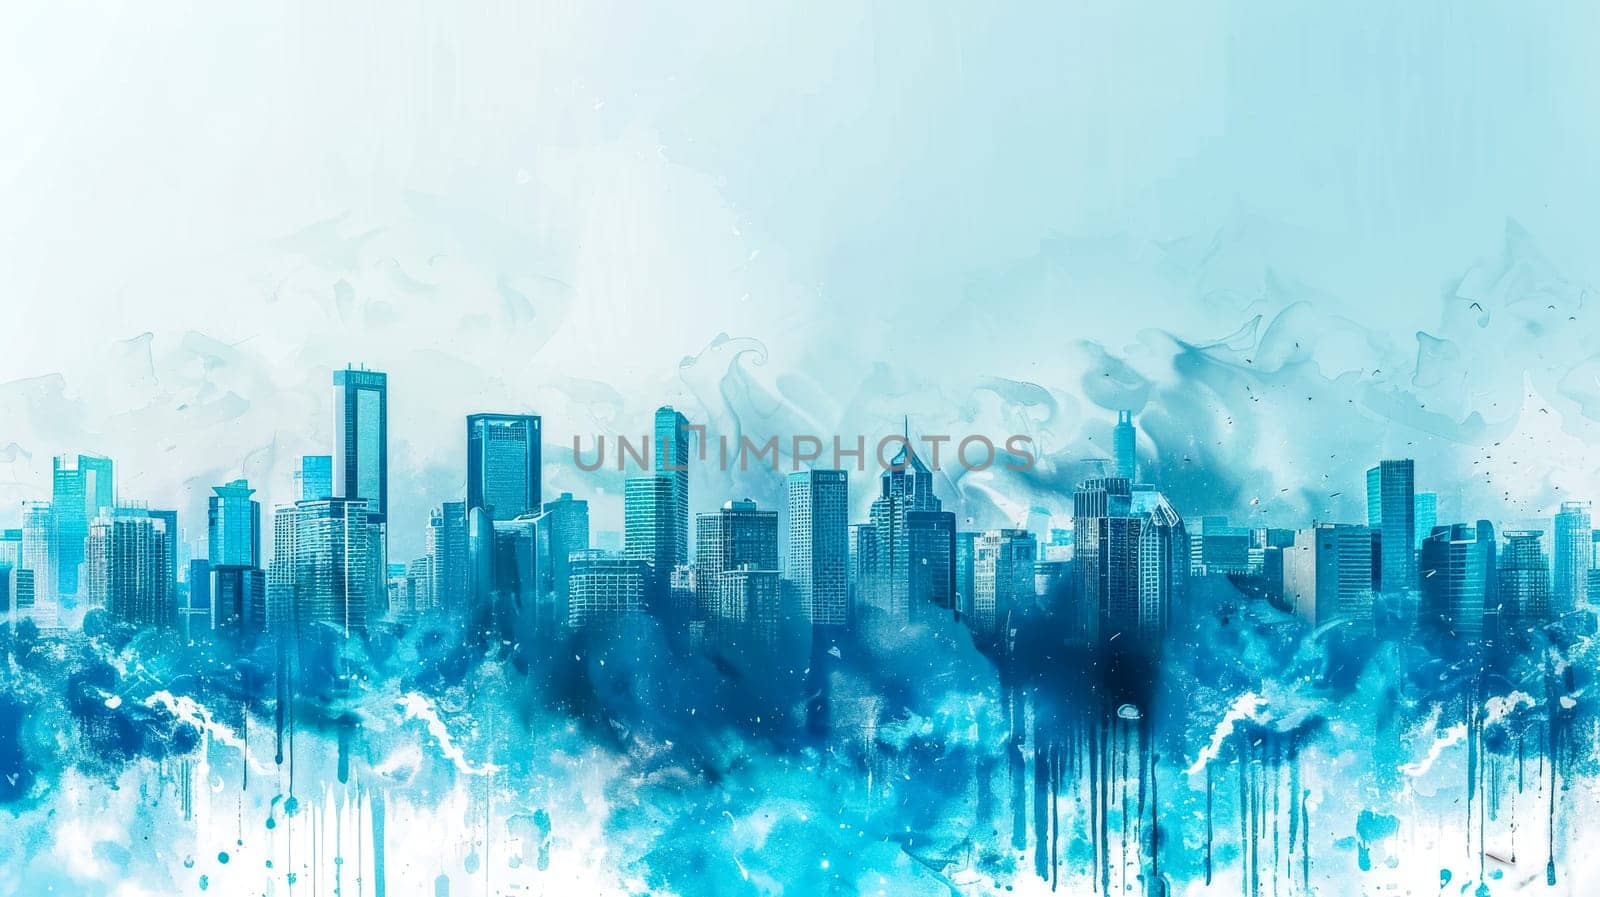 Artistic impression of a city skyline blended with blue watercolor splashes